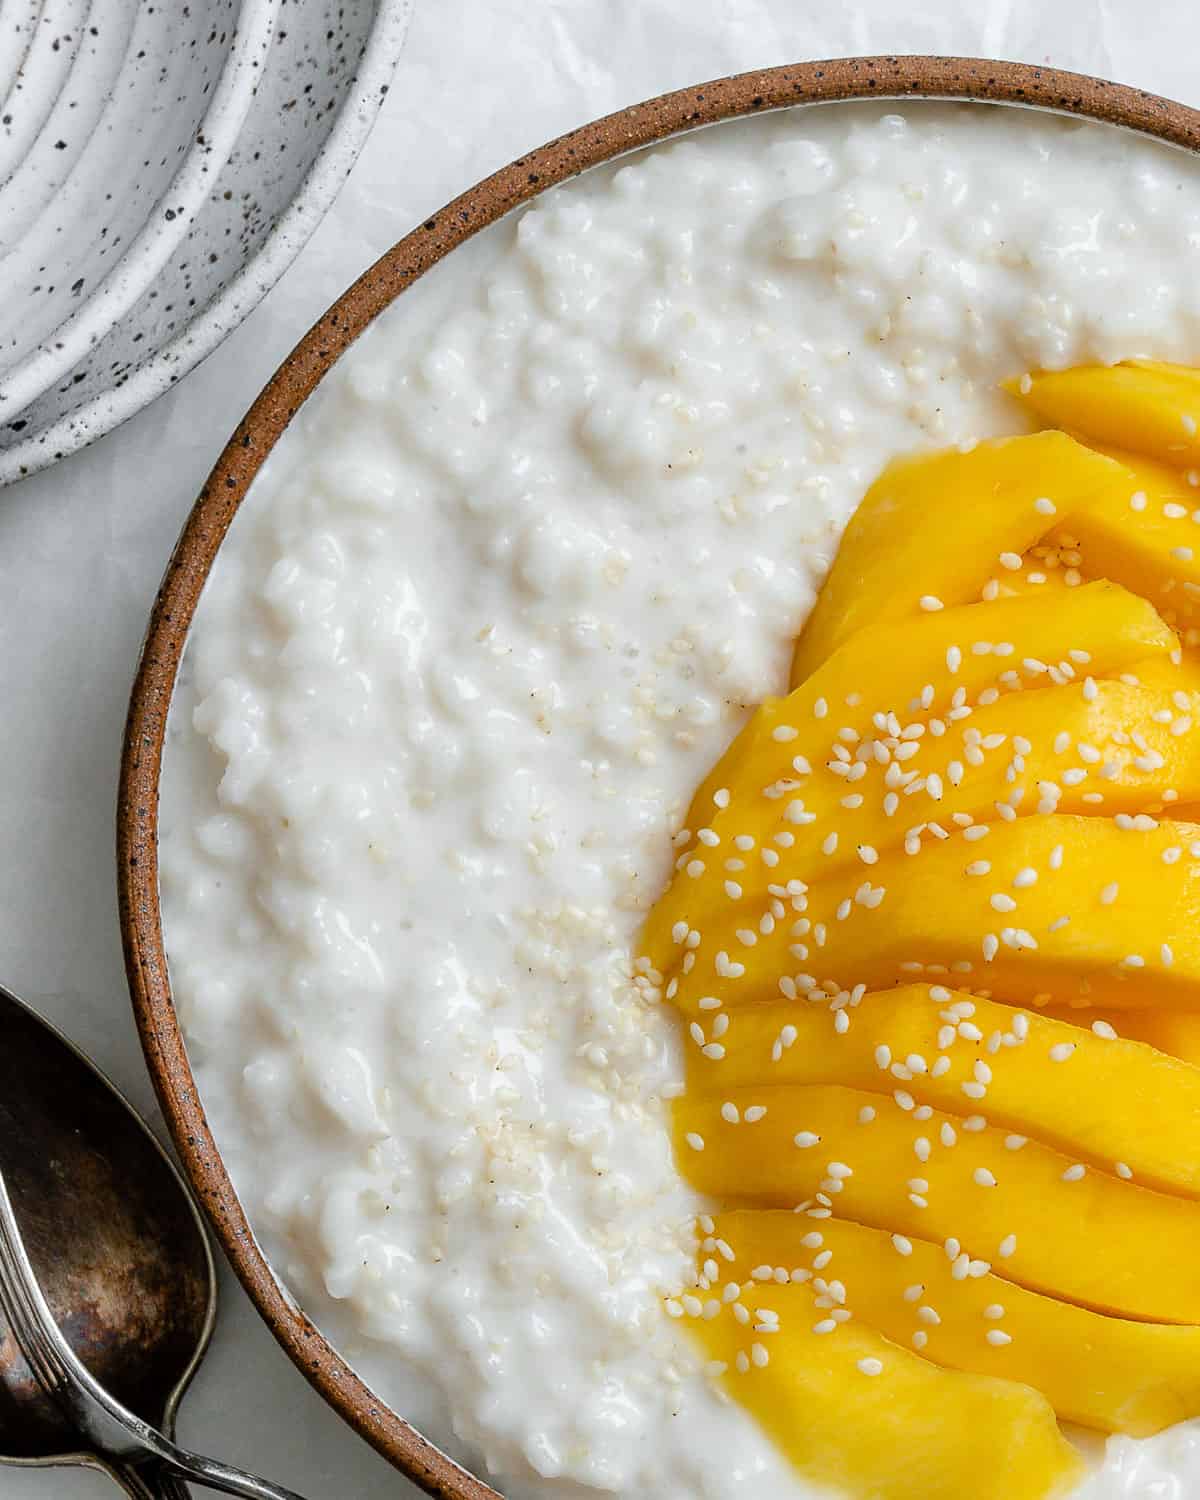 completed Thai Mango Sticky Rice against a white surface